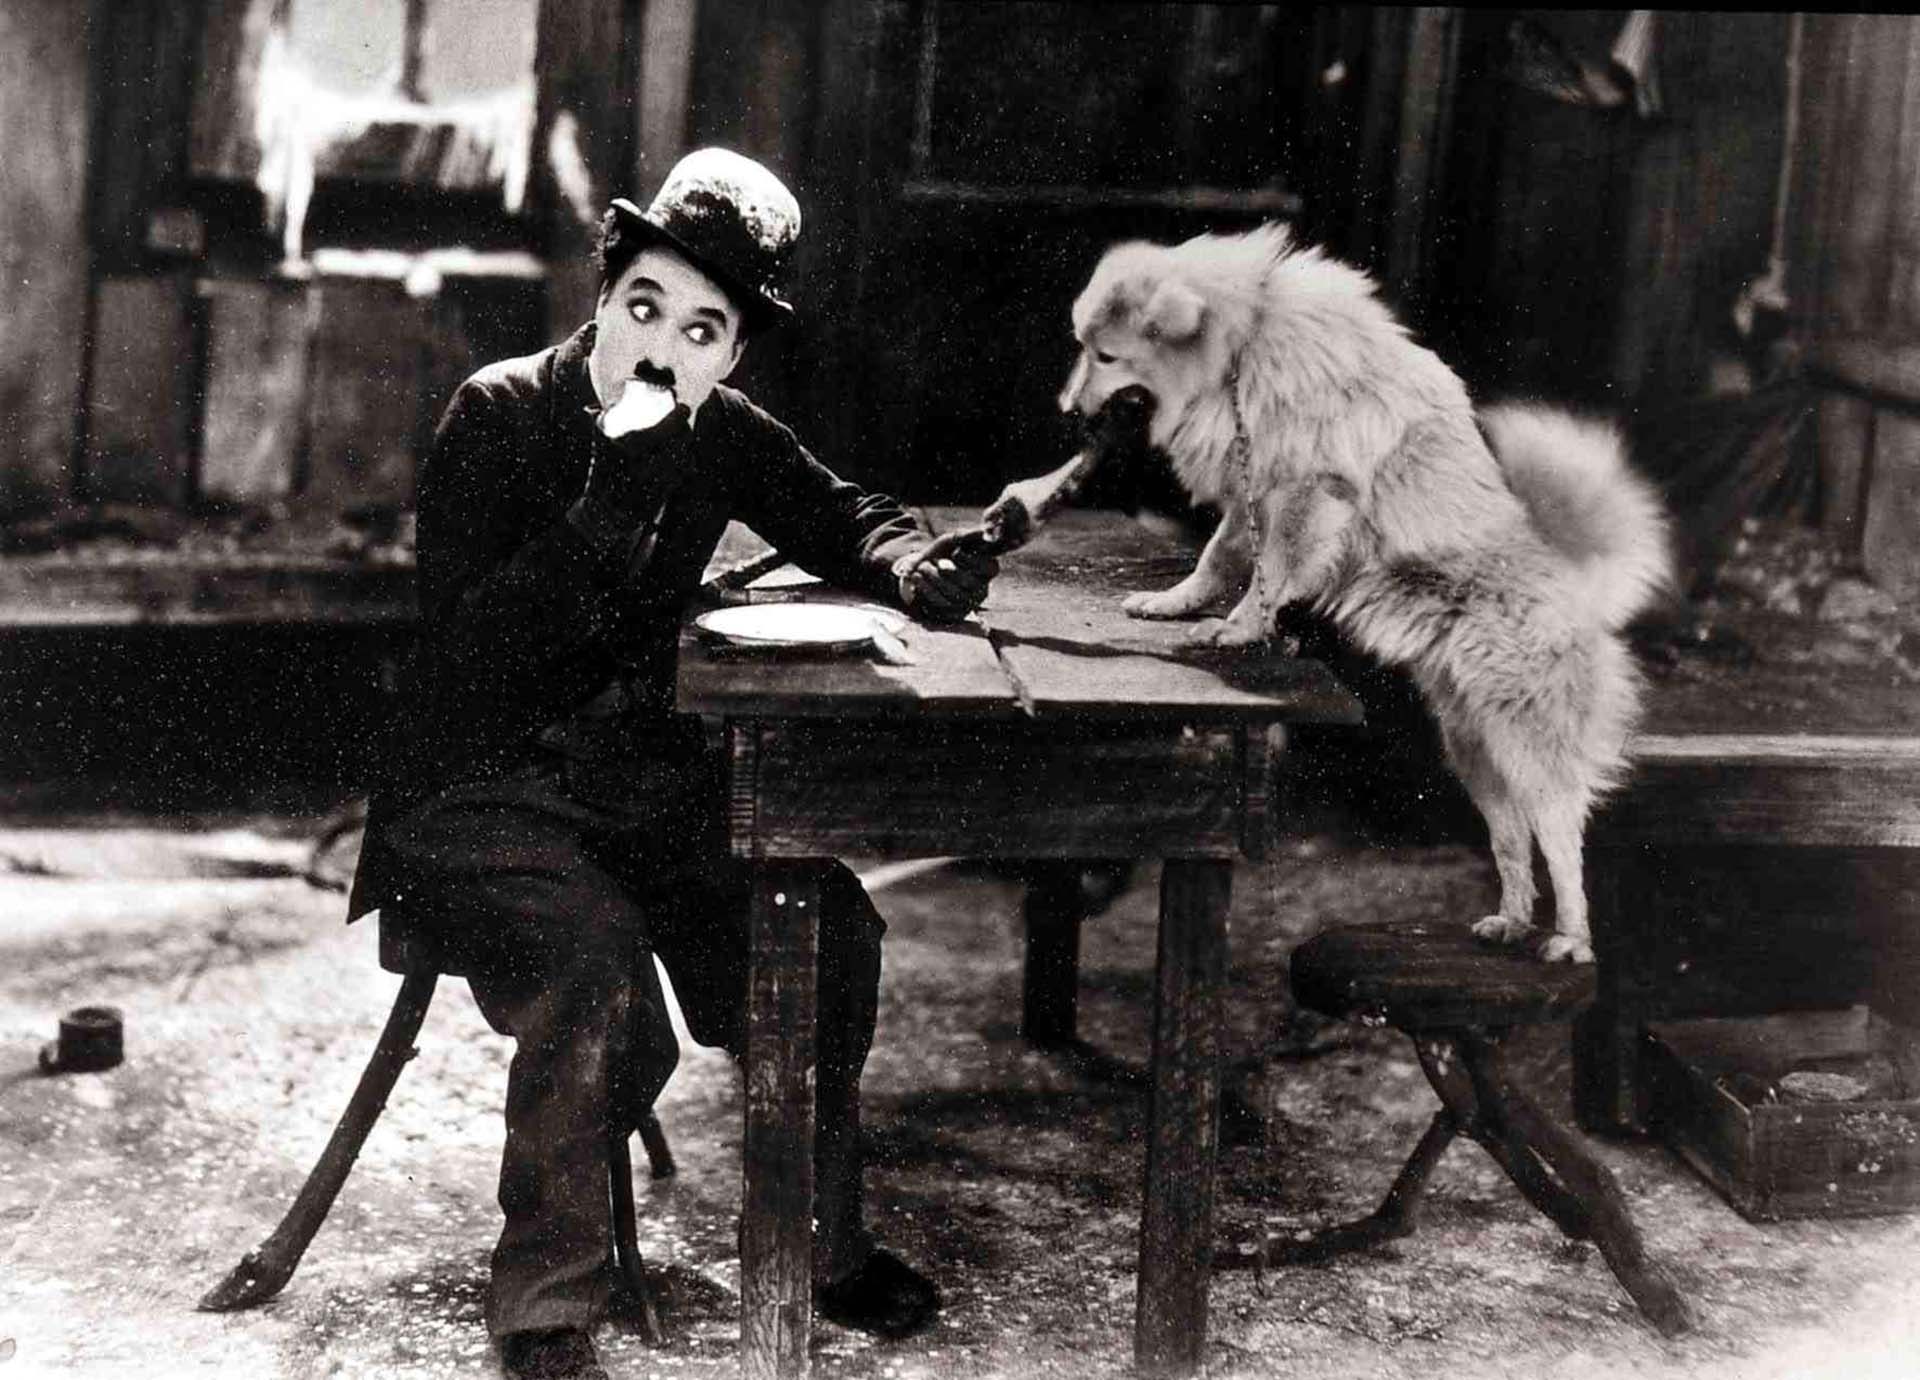 Charles Chaplin murió a los 88 años (FilmPublicityArchive/United Archives via Getty Images)